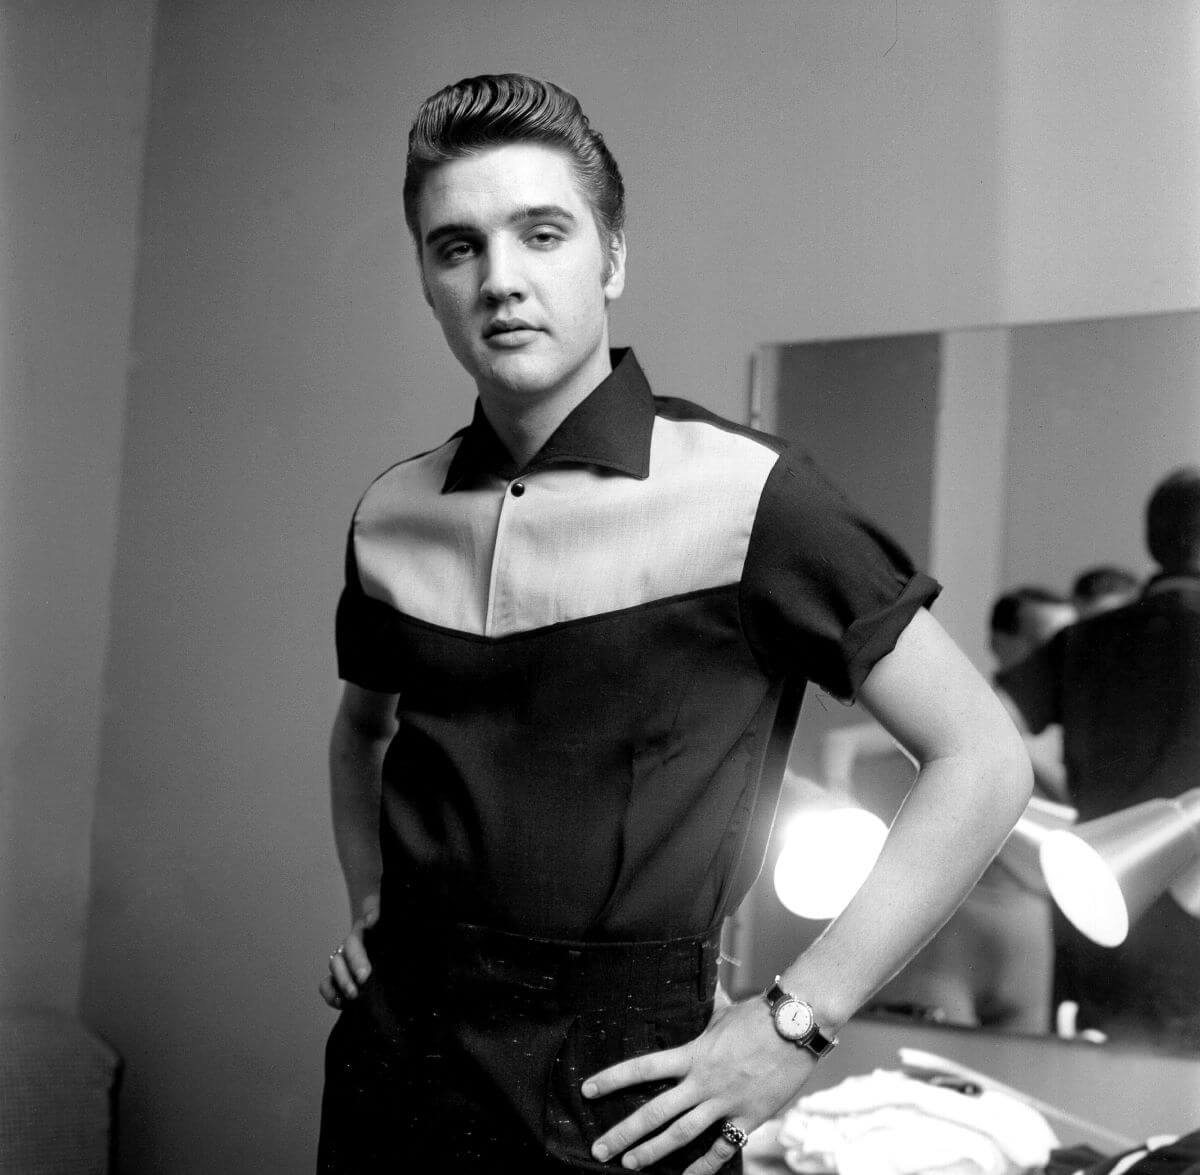 A black and white picture of Elvis Presley standing with his hands on his hips. He wears a collared shirt.